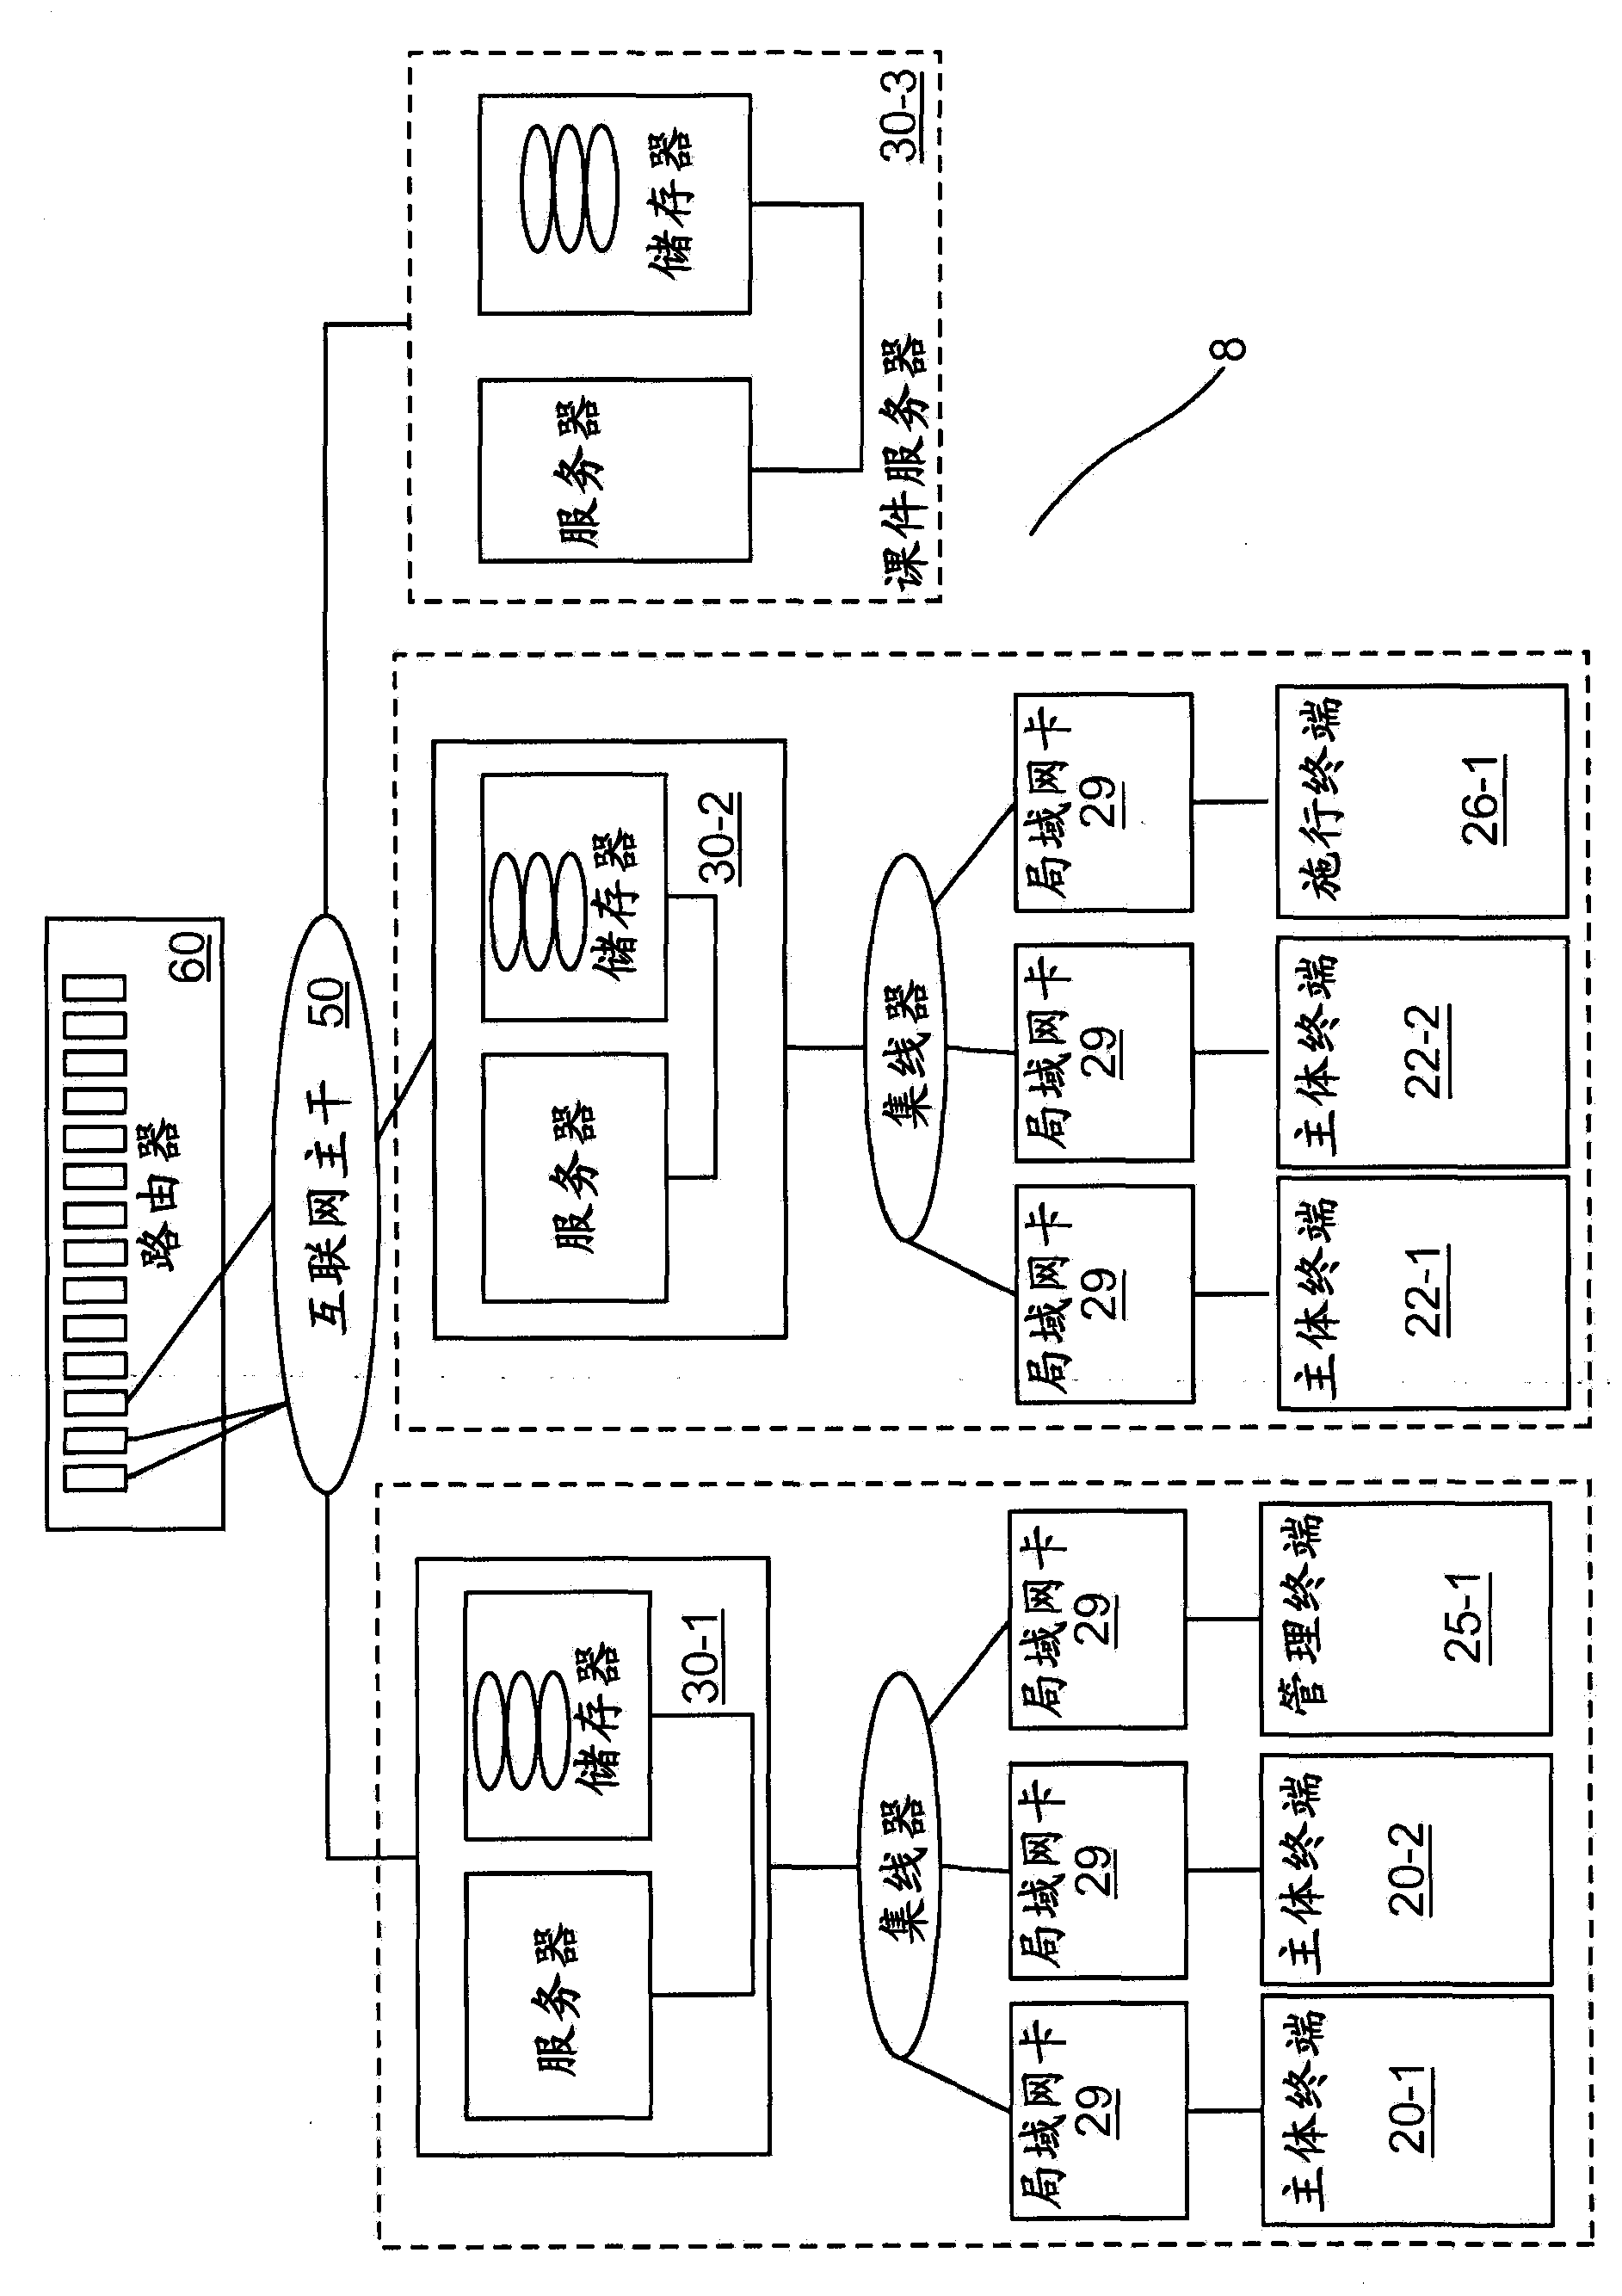 System and method for adaptive knowledge assessment and learning